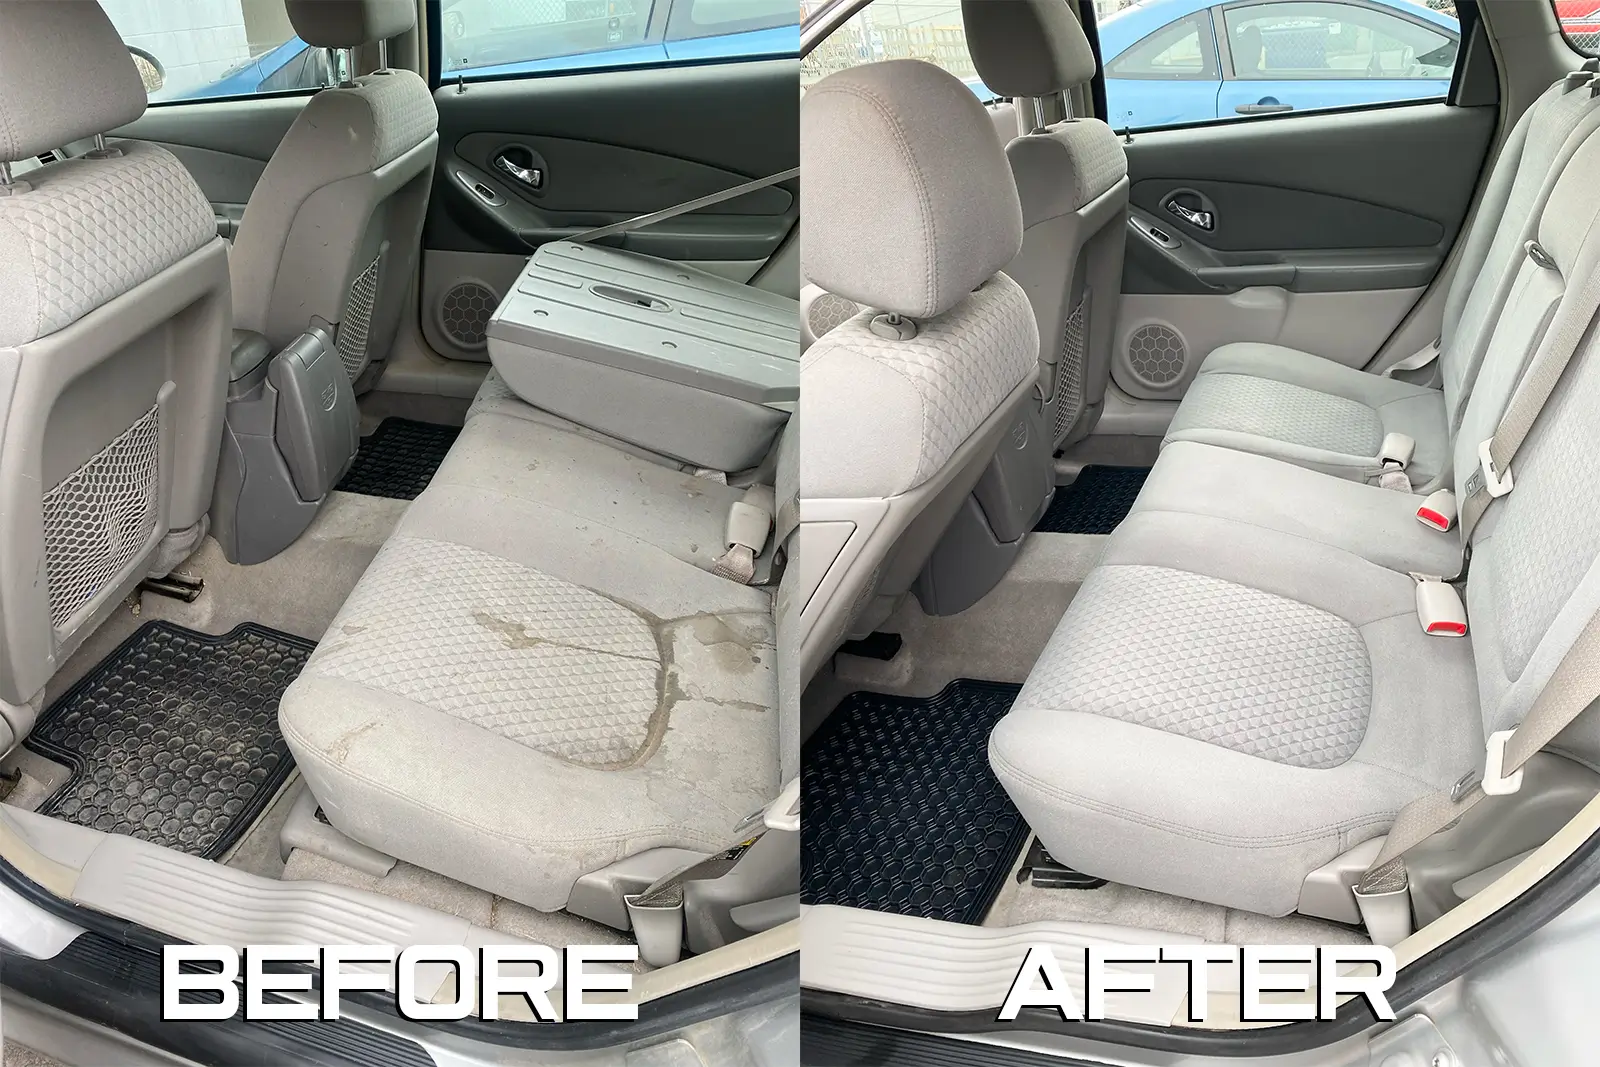 interior of white car before and after detailing - Calgary auto detailers